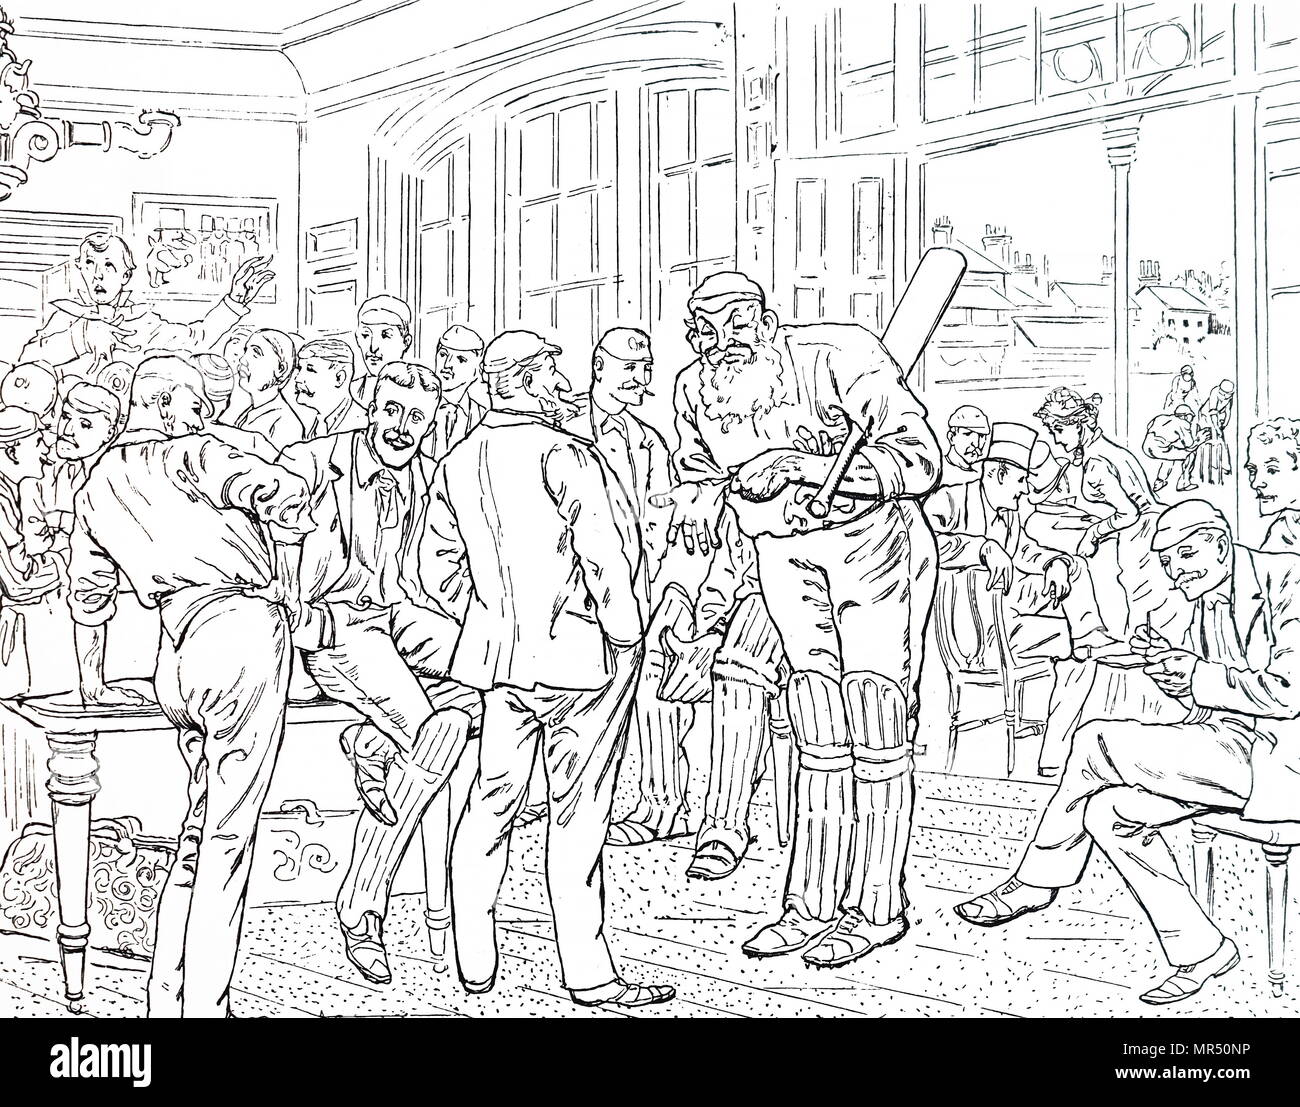 Illustration depicting The Pavilion at Lord's Cricket ground at the end of the season, dominated by the bearded figure of W. G. Grace with other eminent players around him. Illustrated by Harry Furniss (1854-1925) an Irish-born English artist and illustrator. Dated 19th century Stock Photo